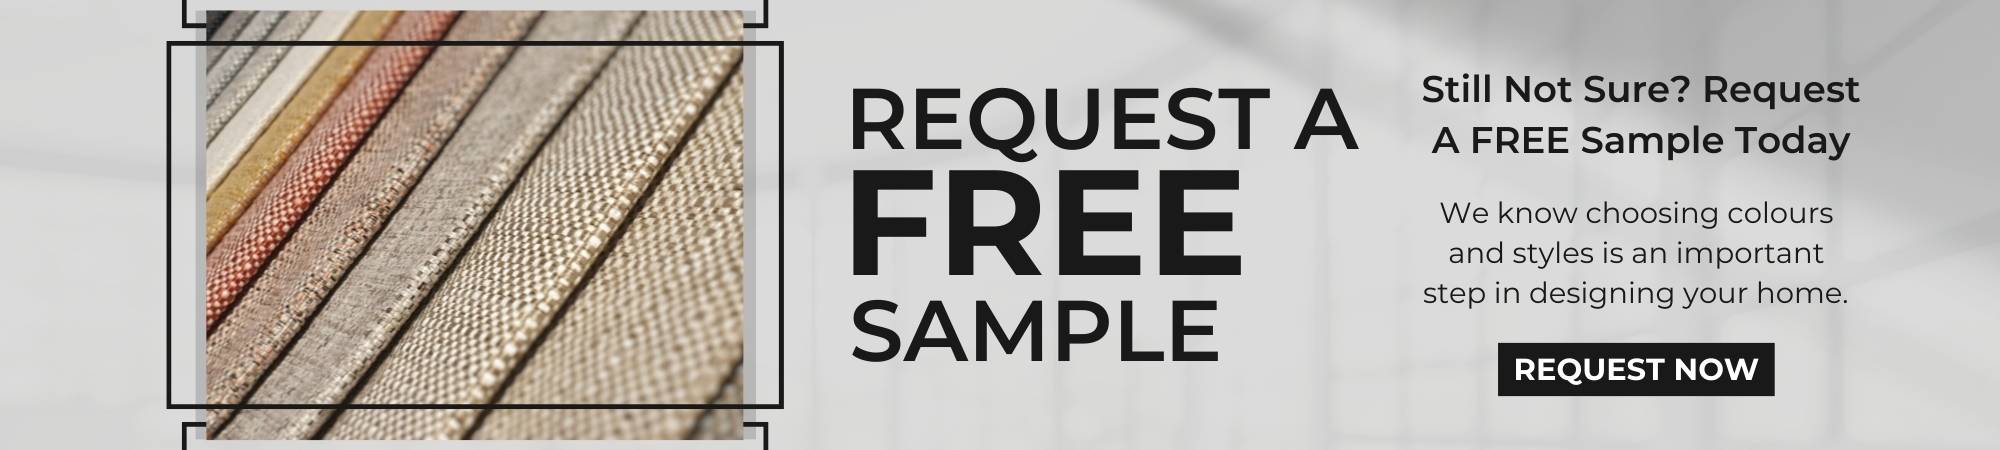 Request A FREE Sample Today